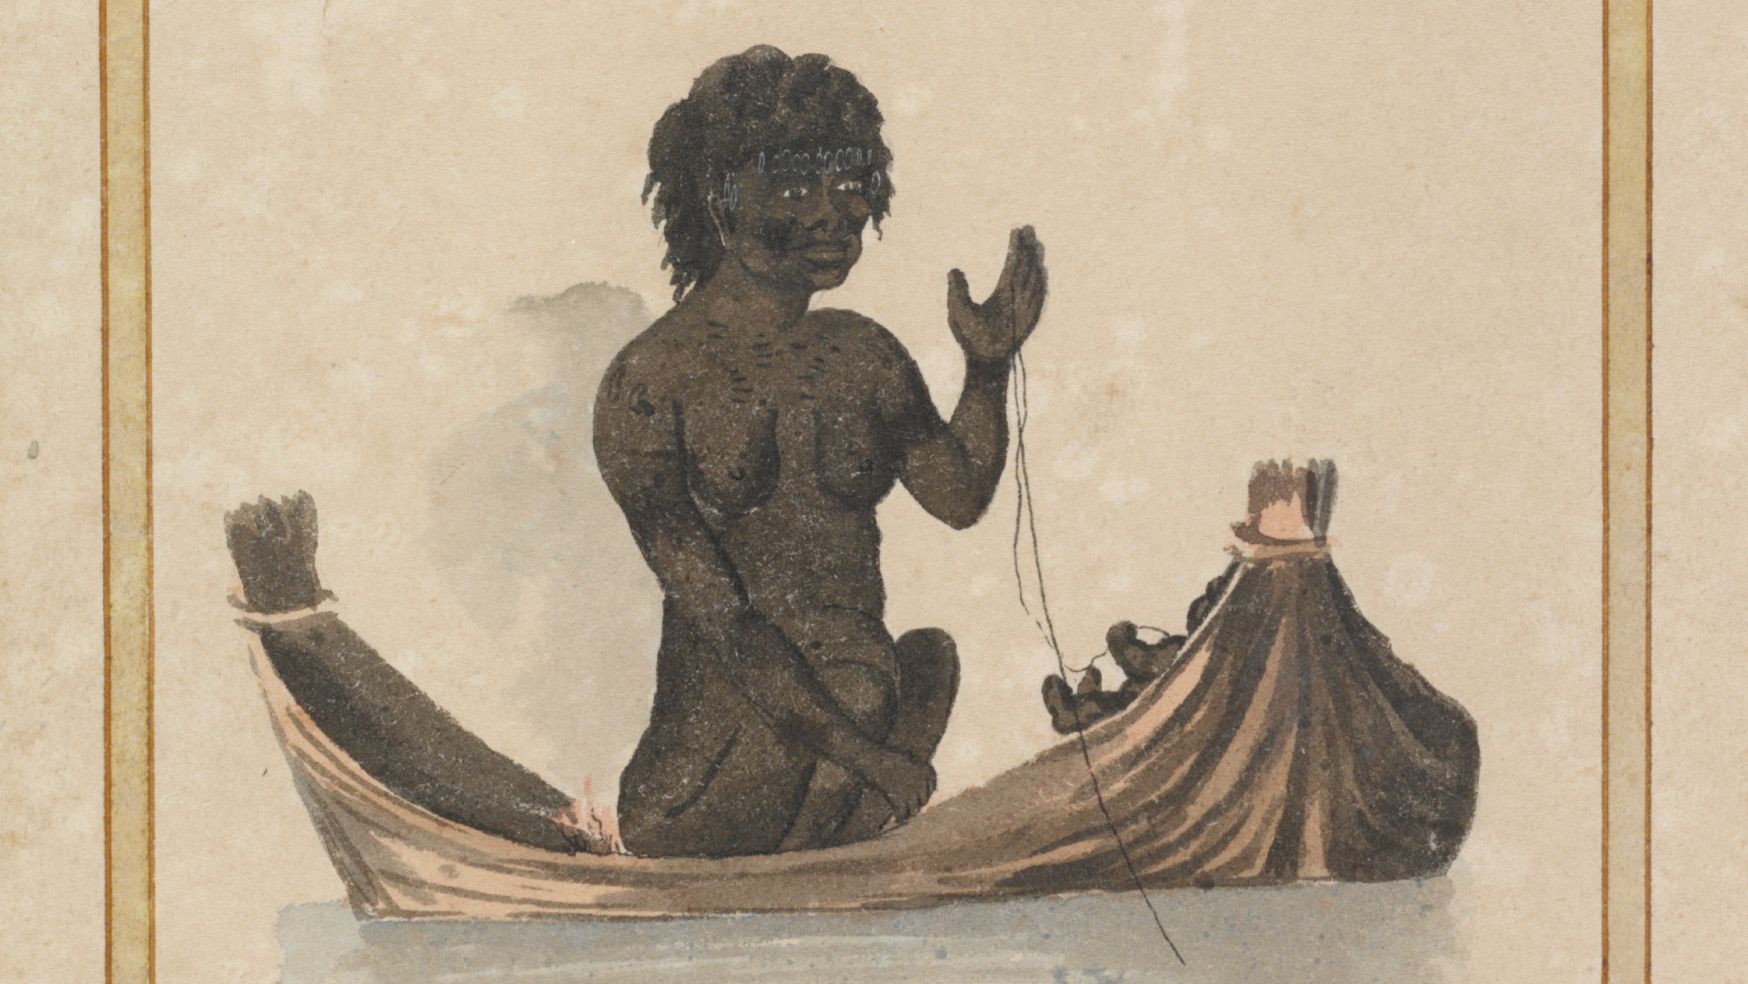 Handpainted image from book of woman in canoe. Margins of page visible on left and right.